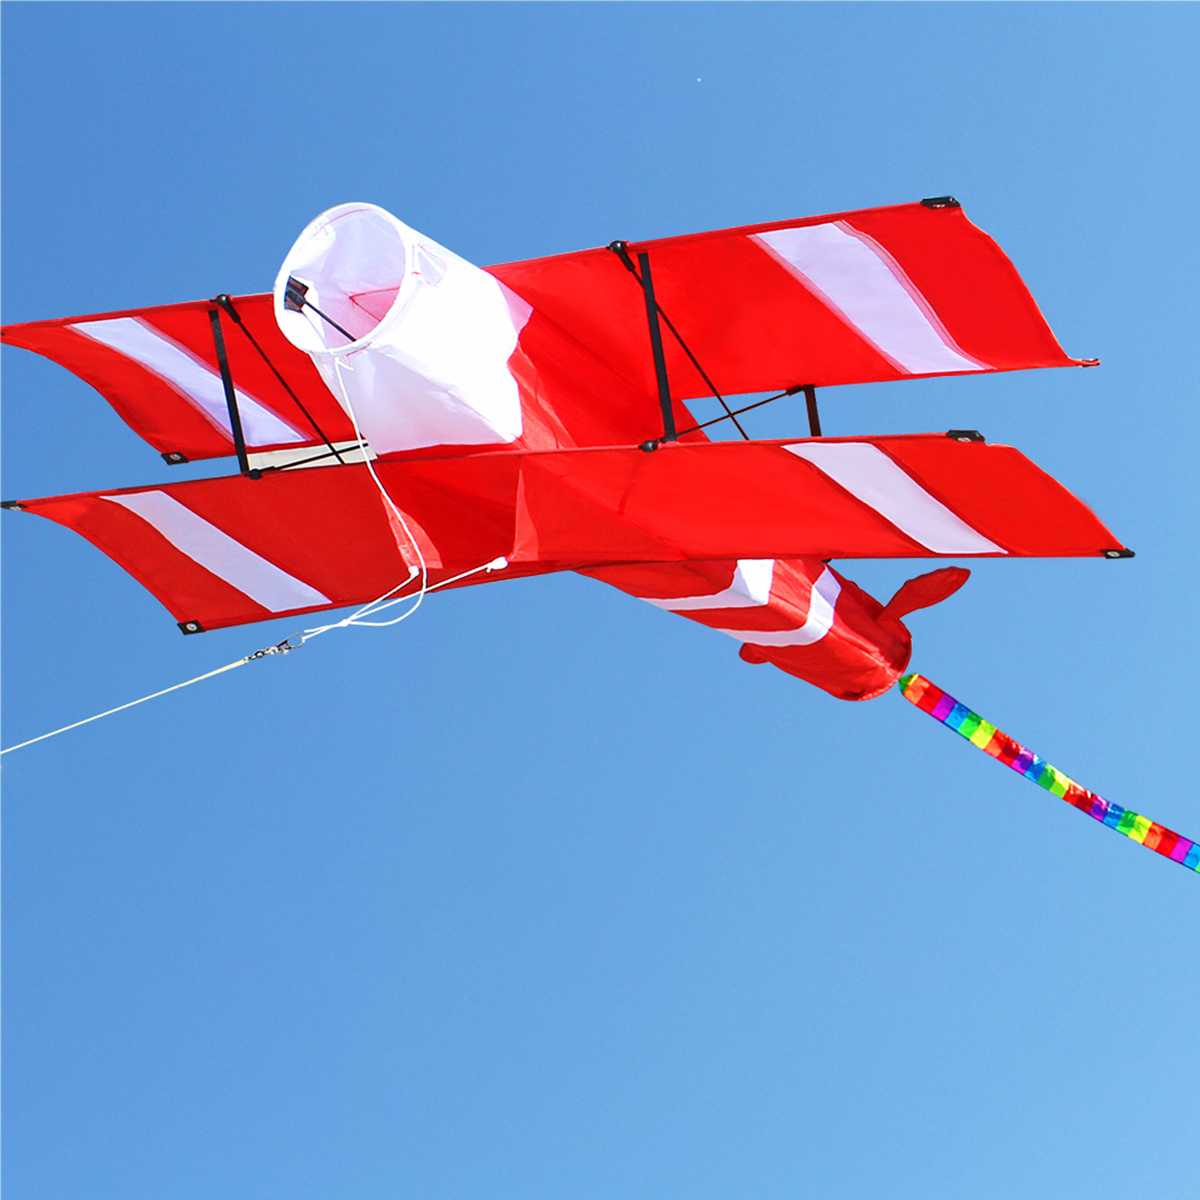 New High Quality 3D Single Line Red Yellow Kites Sports Beach With Kite Handle and String Easy to Fly